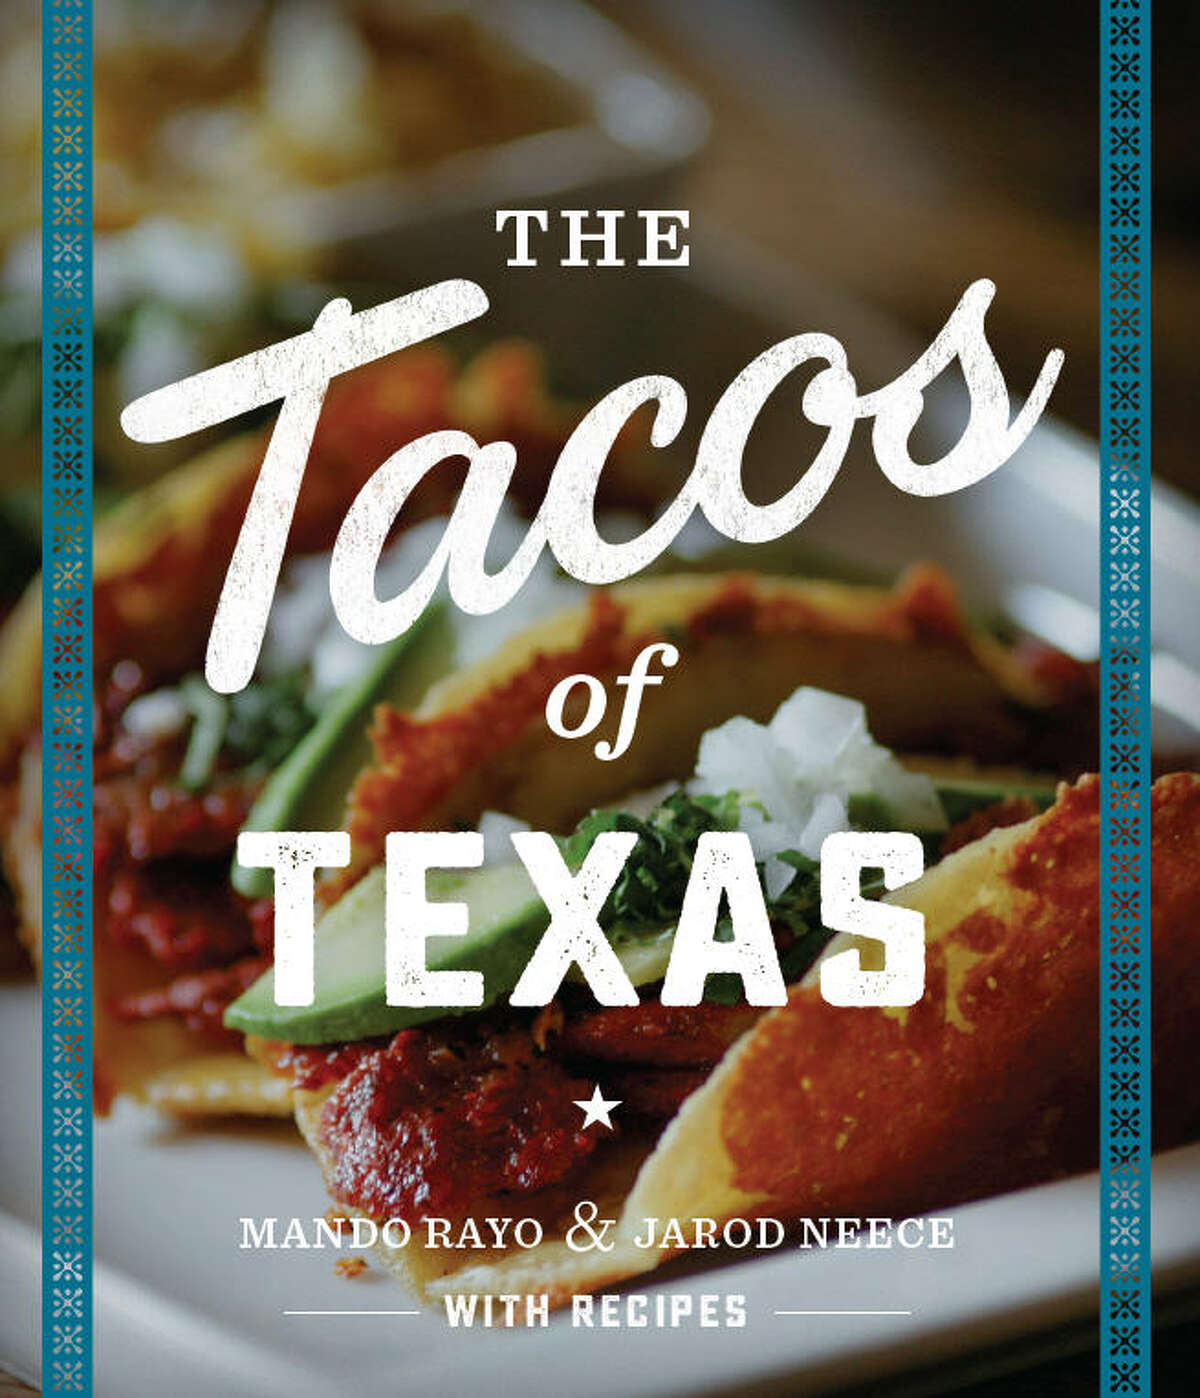 The three amigos!  According to the book, there are three distinct types of tacos in Texas: Traditional, Tex-Mex and New Americano.